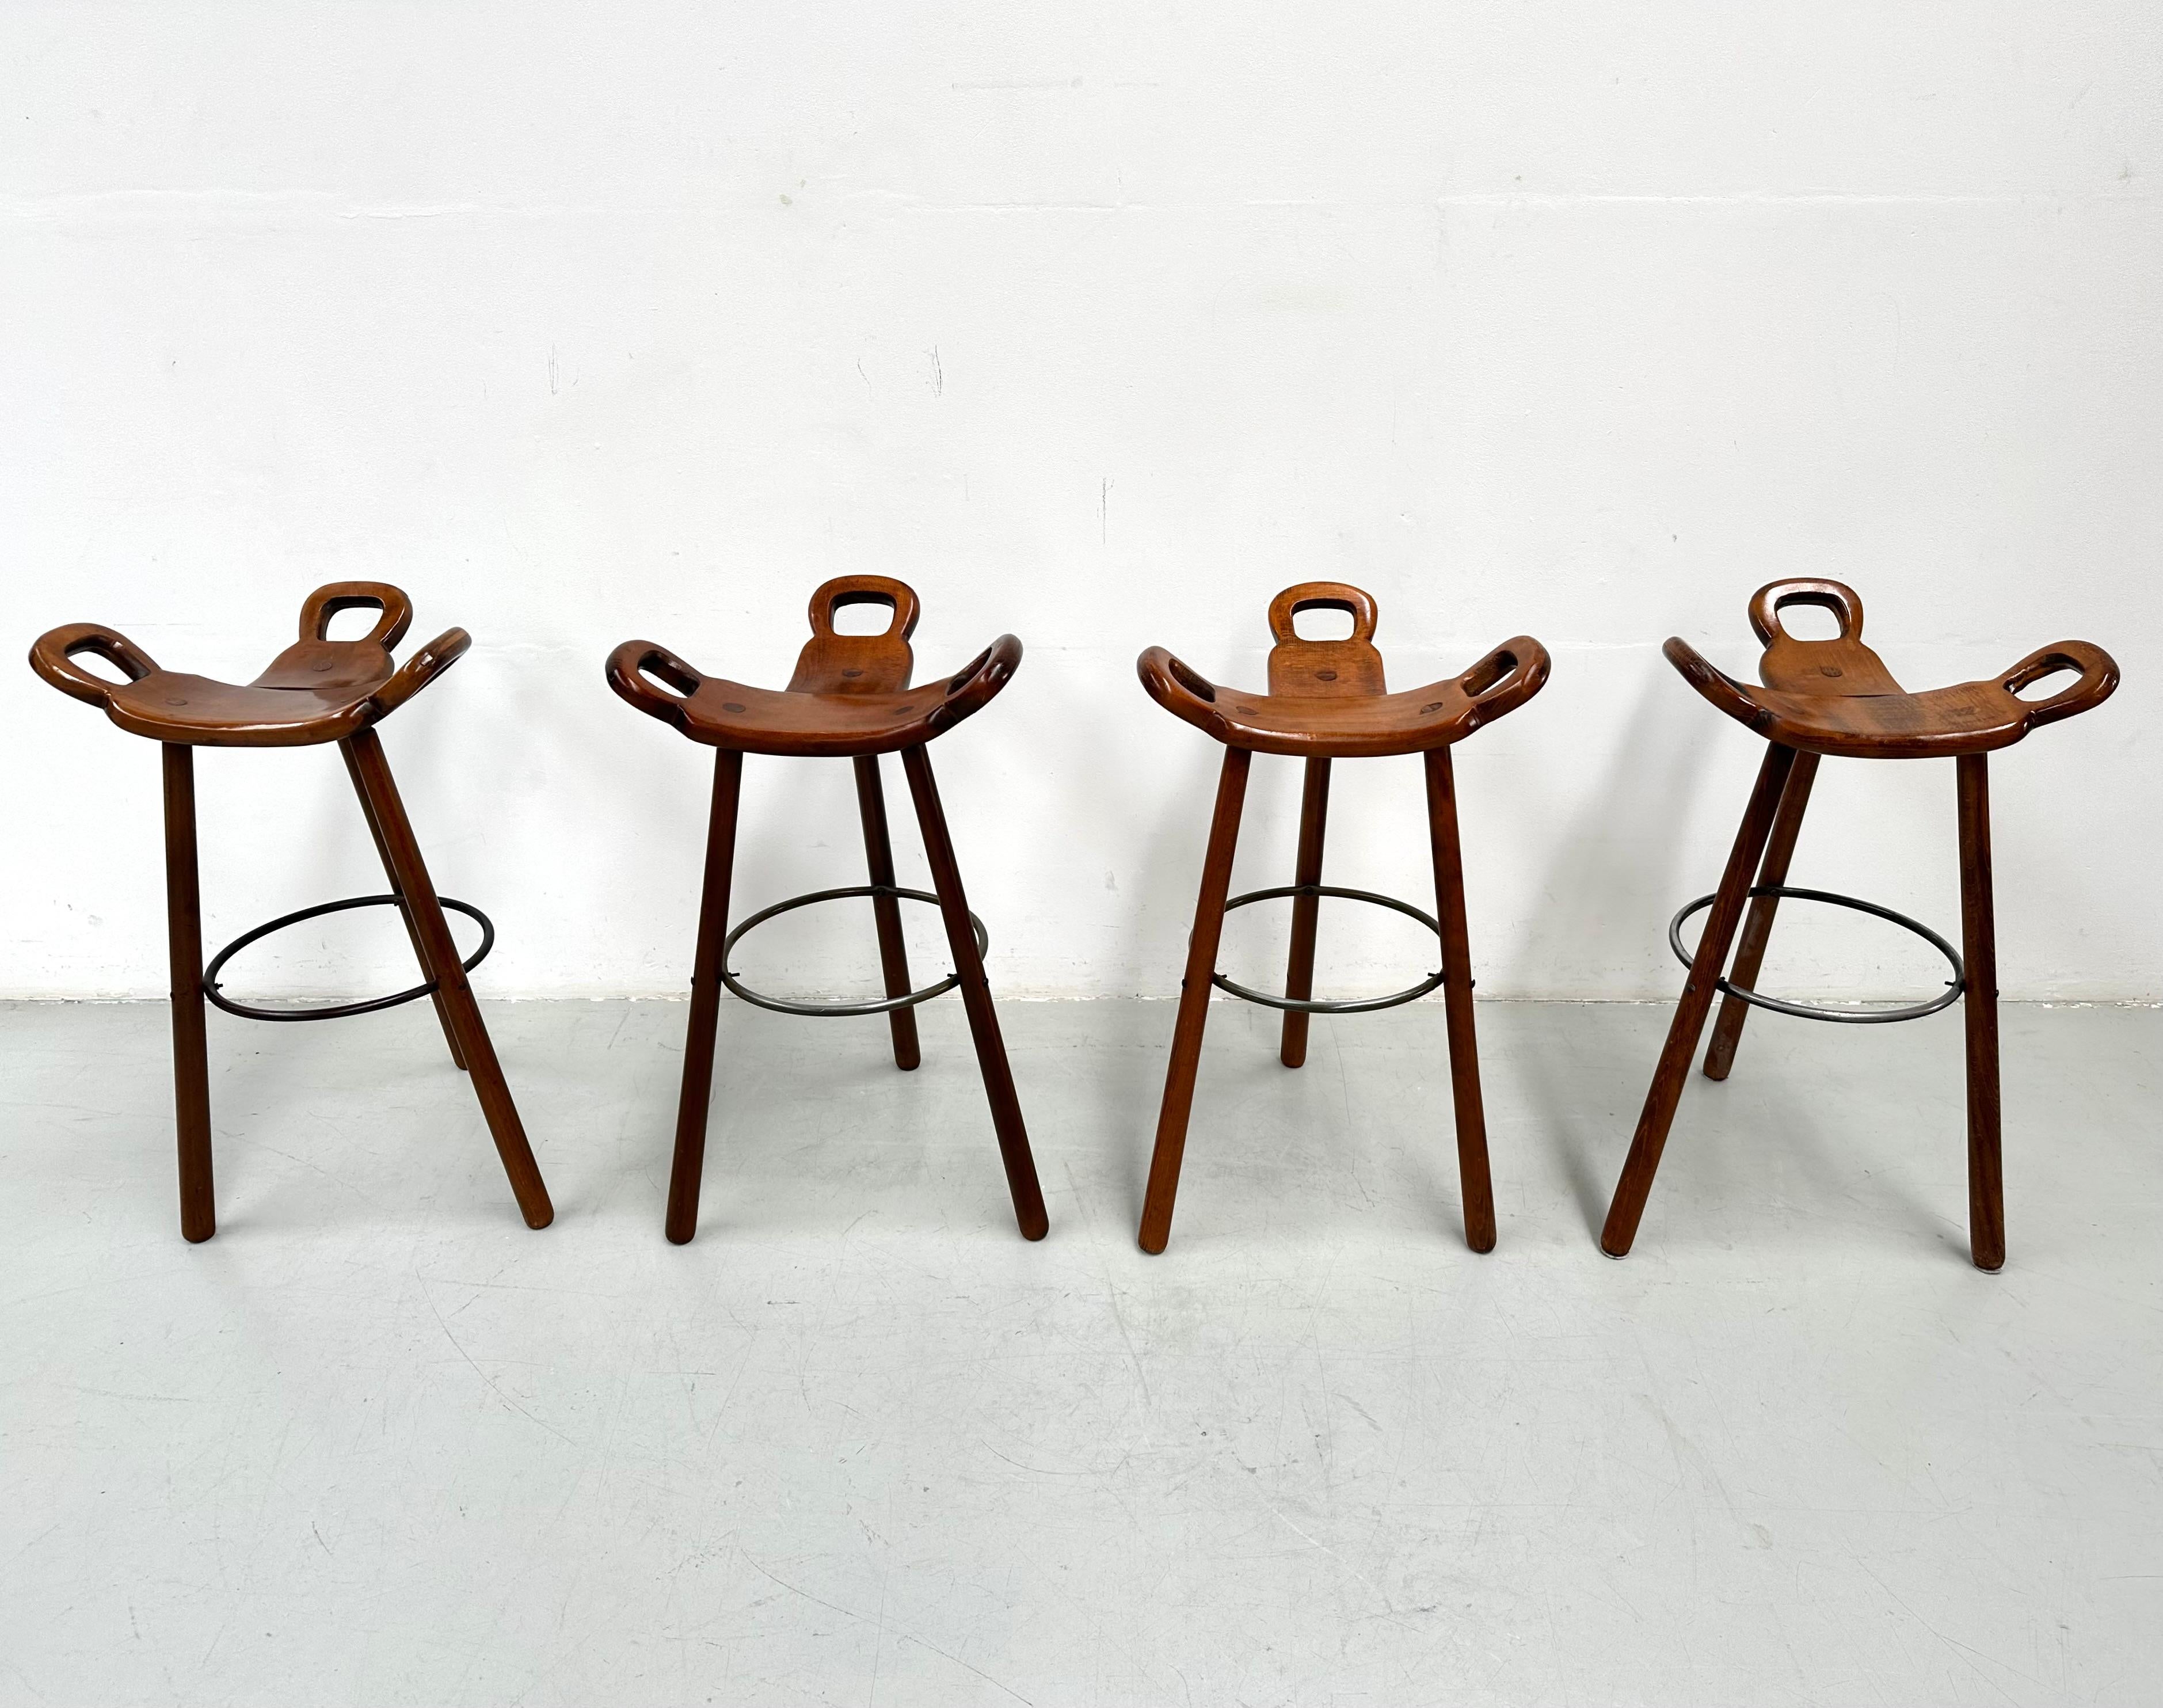 Spanish Set of 4 Marbella Brutalist Stools by Sergio Rodrigues for Confonorm 1970s.